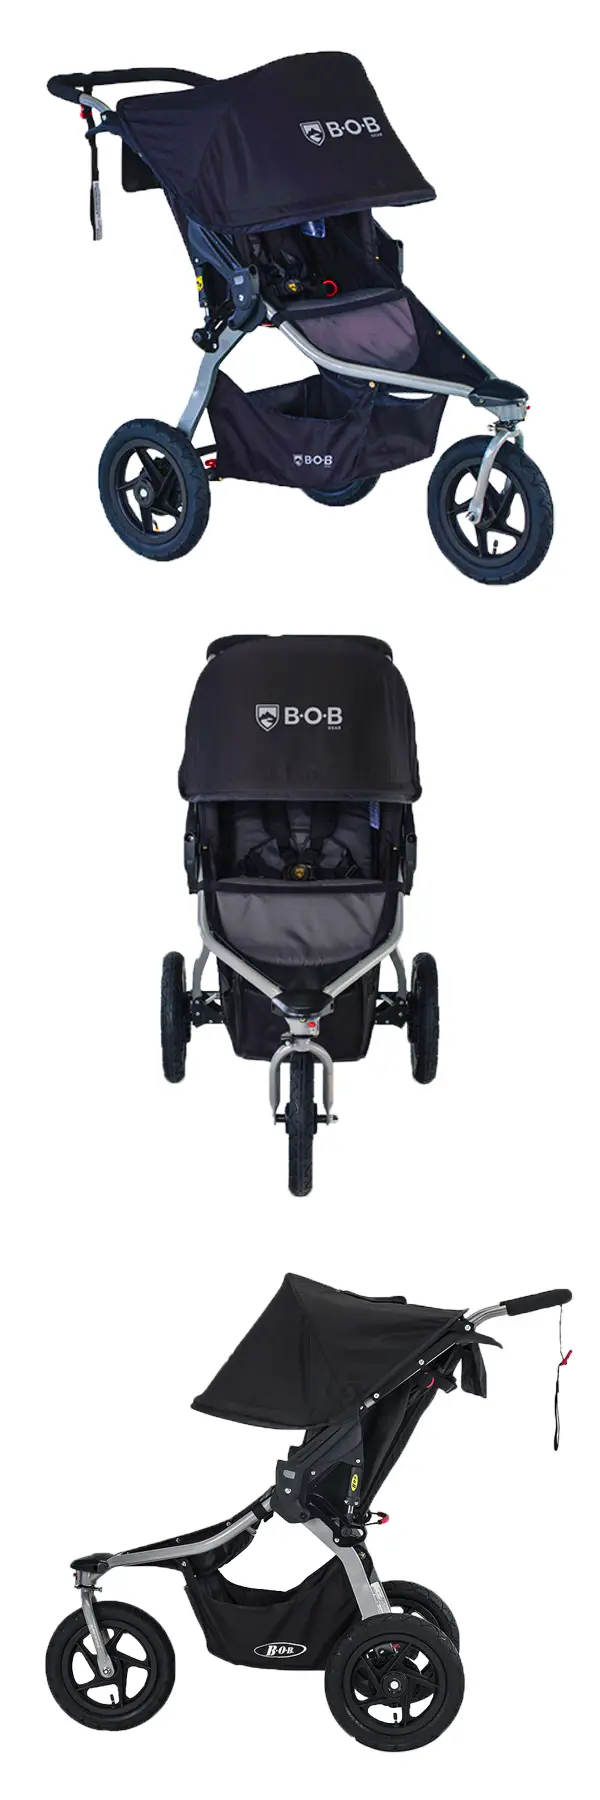 BOB Rambler stroller front and side view